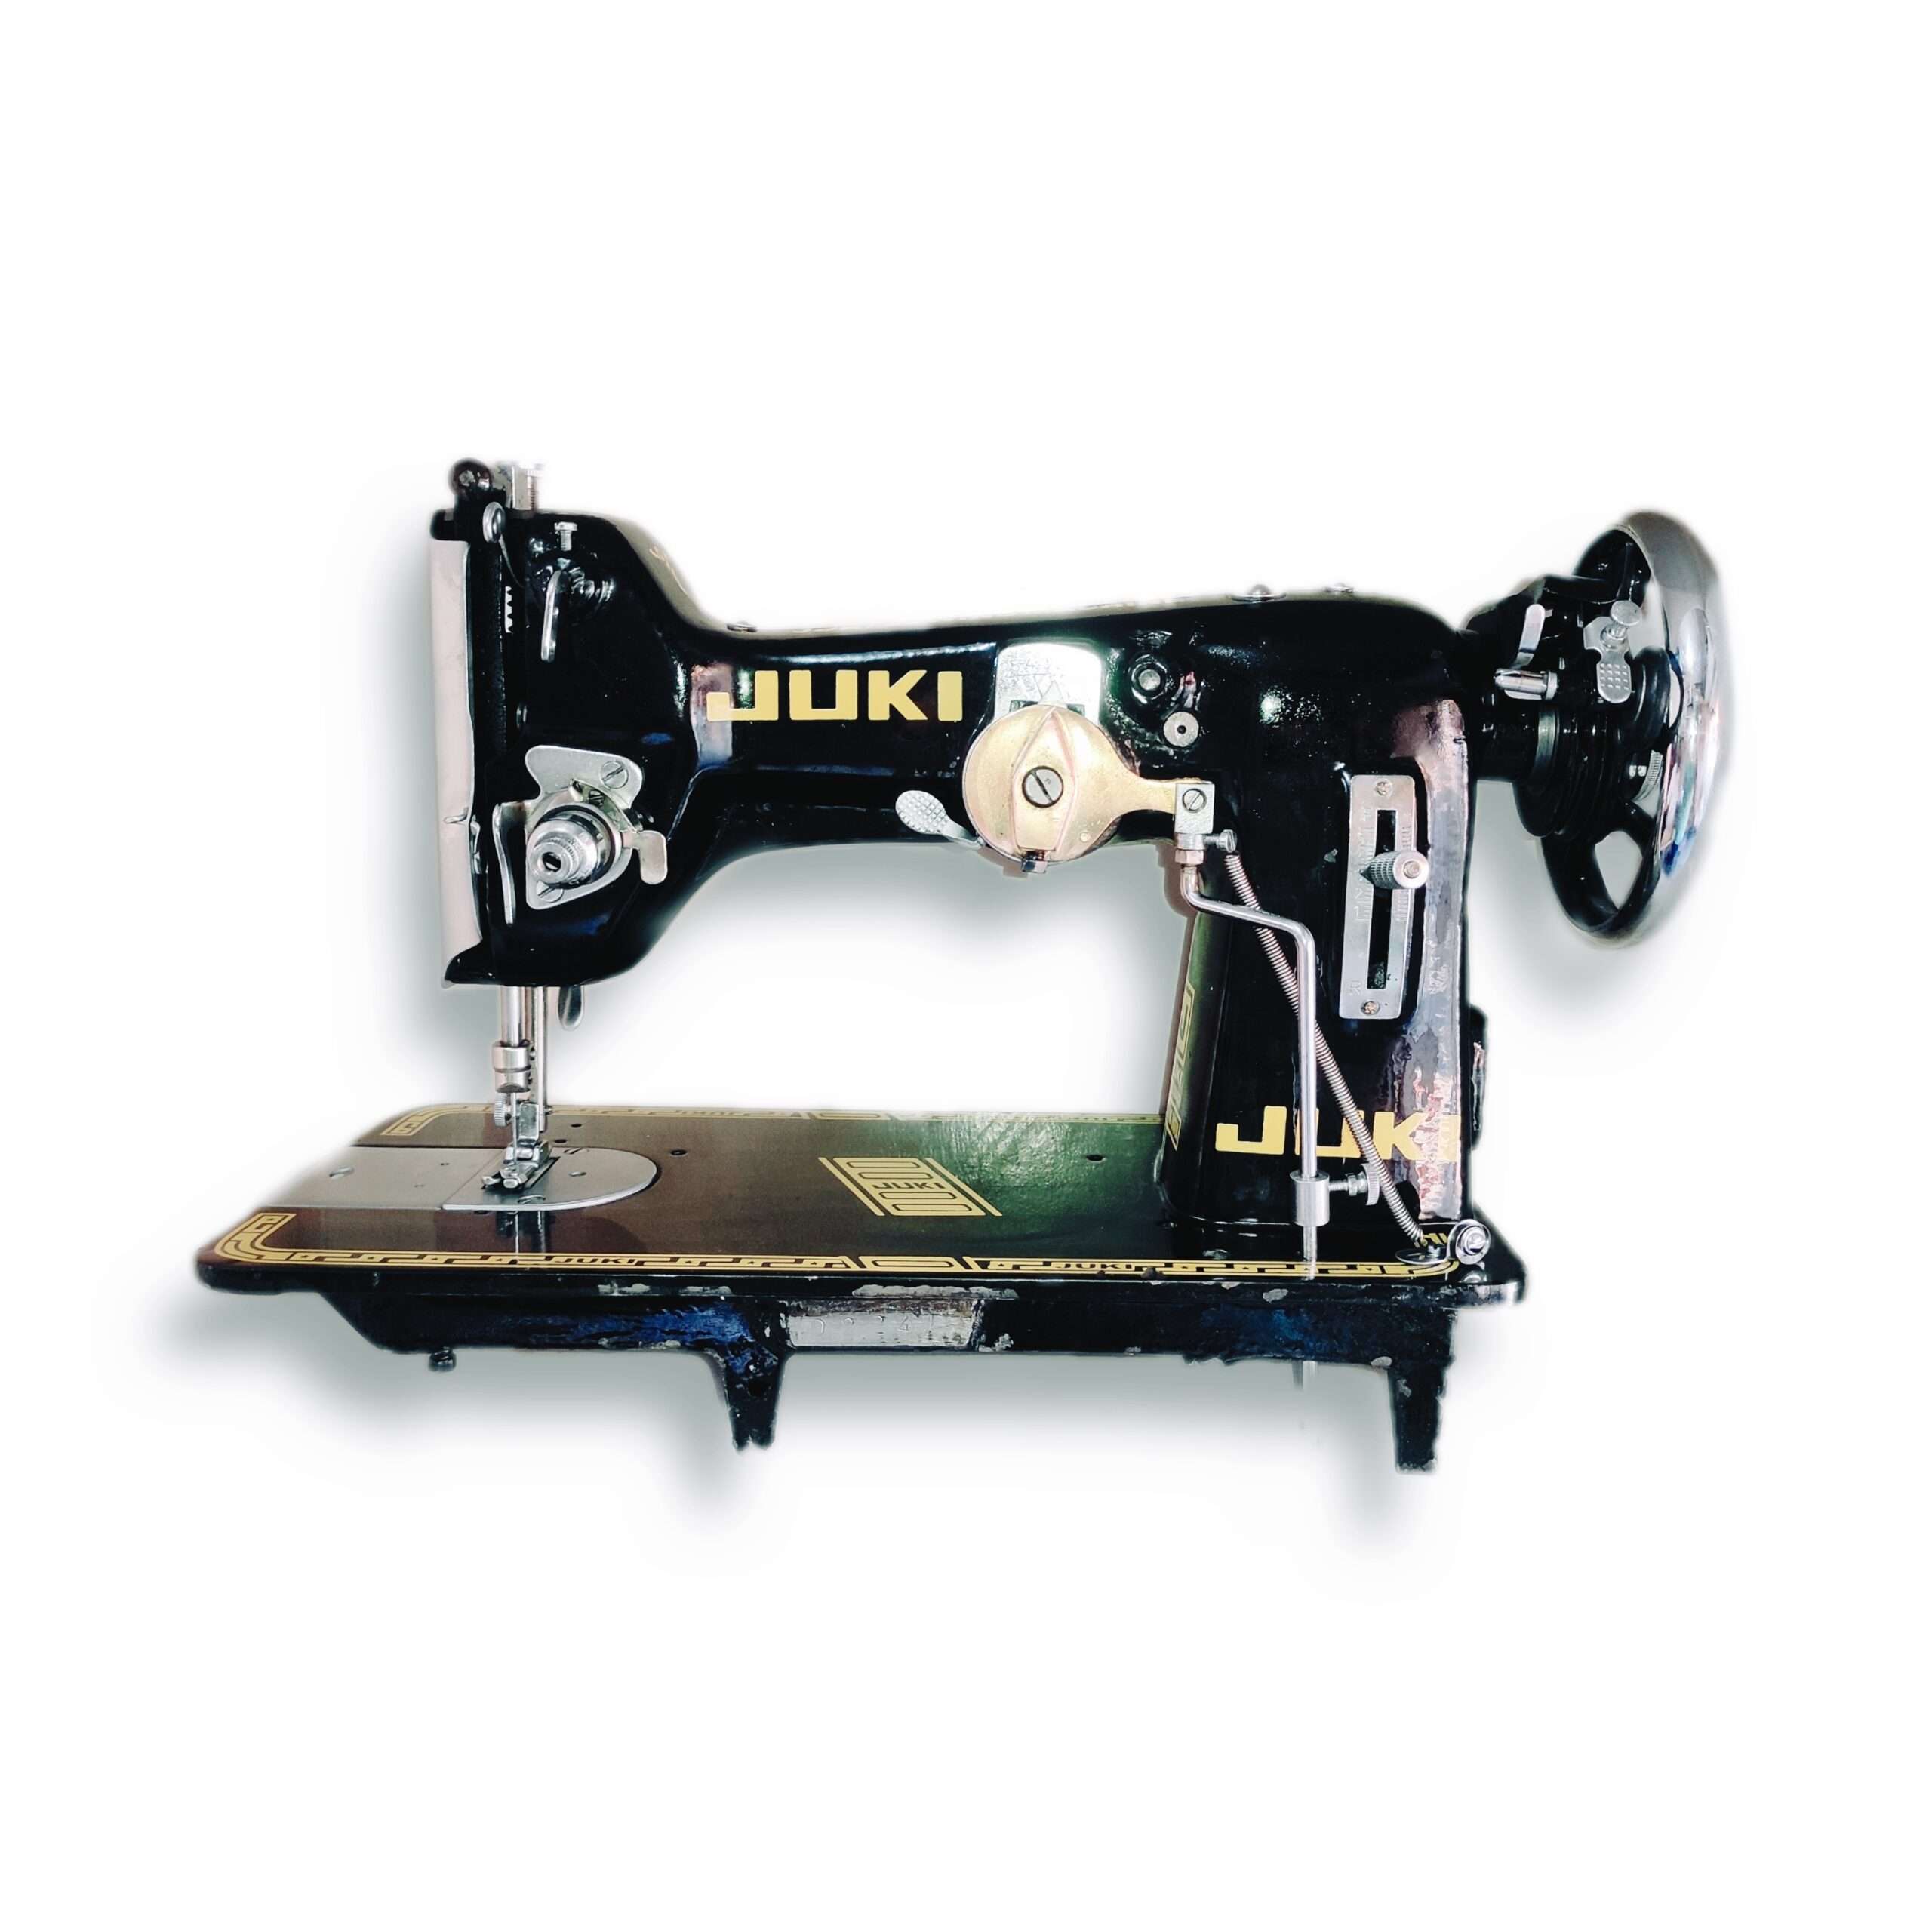 Al hind Sewing Machine Motor (Copper Winding) Electric Sewing Machine Price  in India - Buy Al hind Sewing Machine Motor (Copper Winding) Electric  Sewing Machine online at